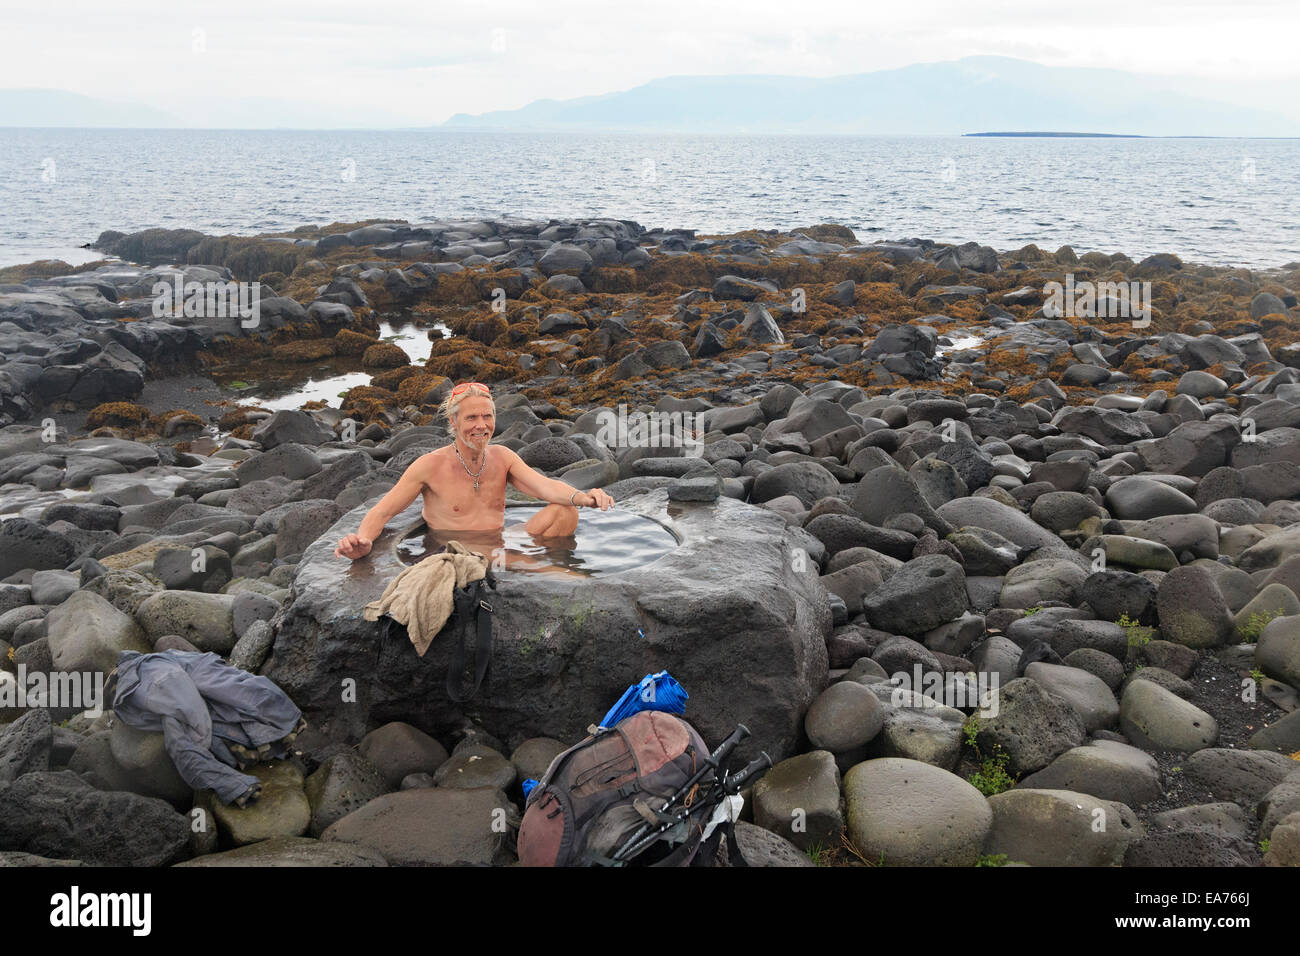 Local man bathes in a natural hot spring set in rocks at the shoreline of Reykjavik's waterfront. Stock Photo